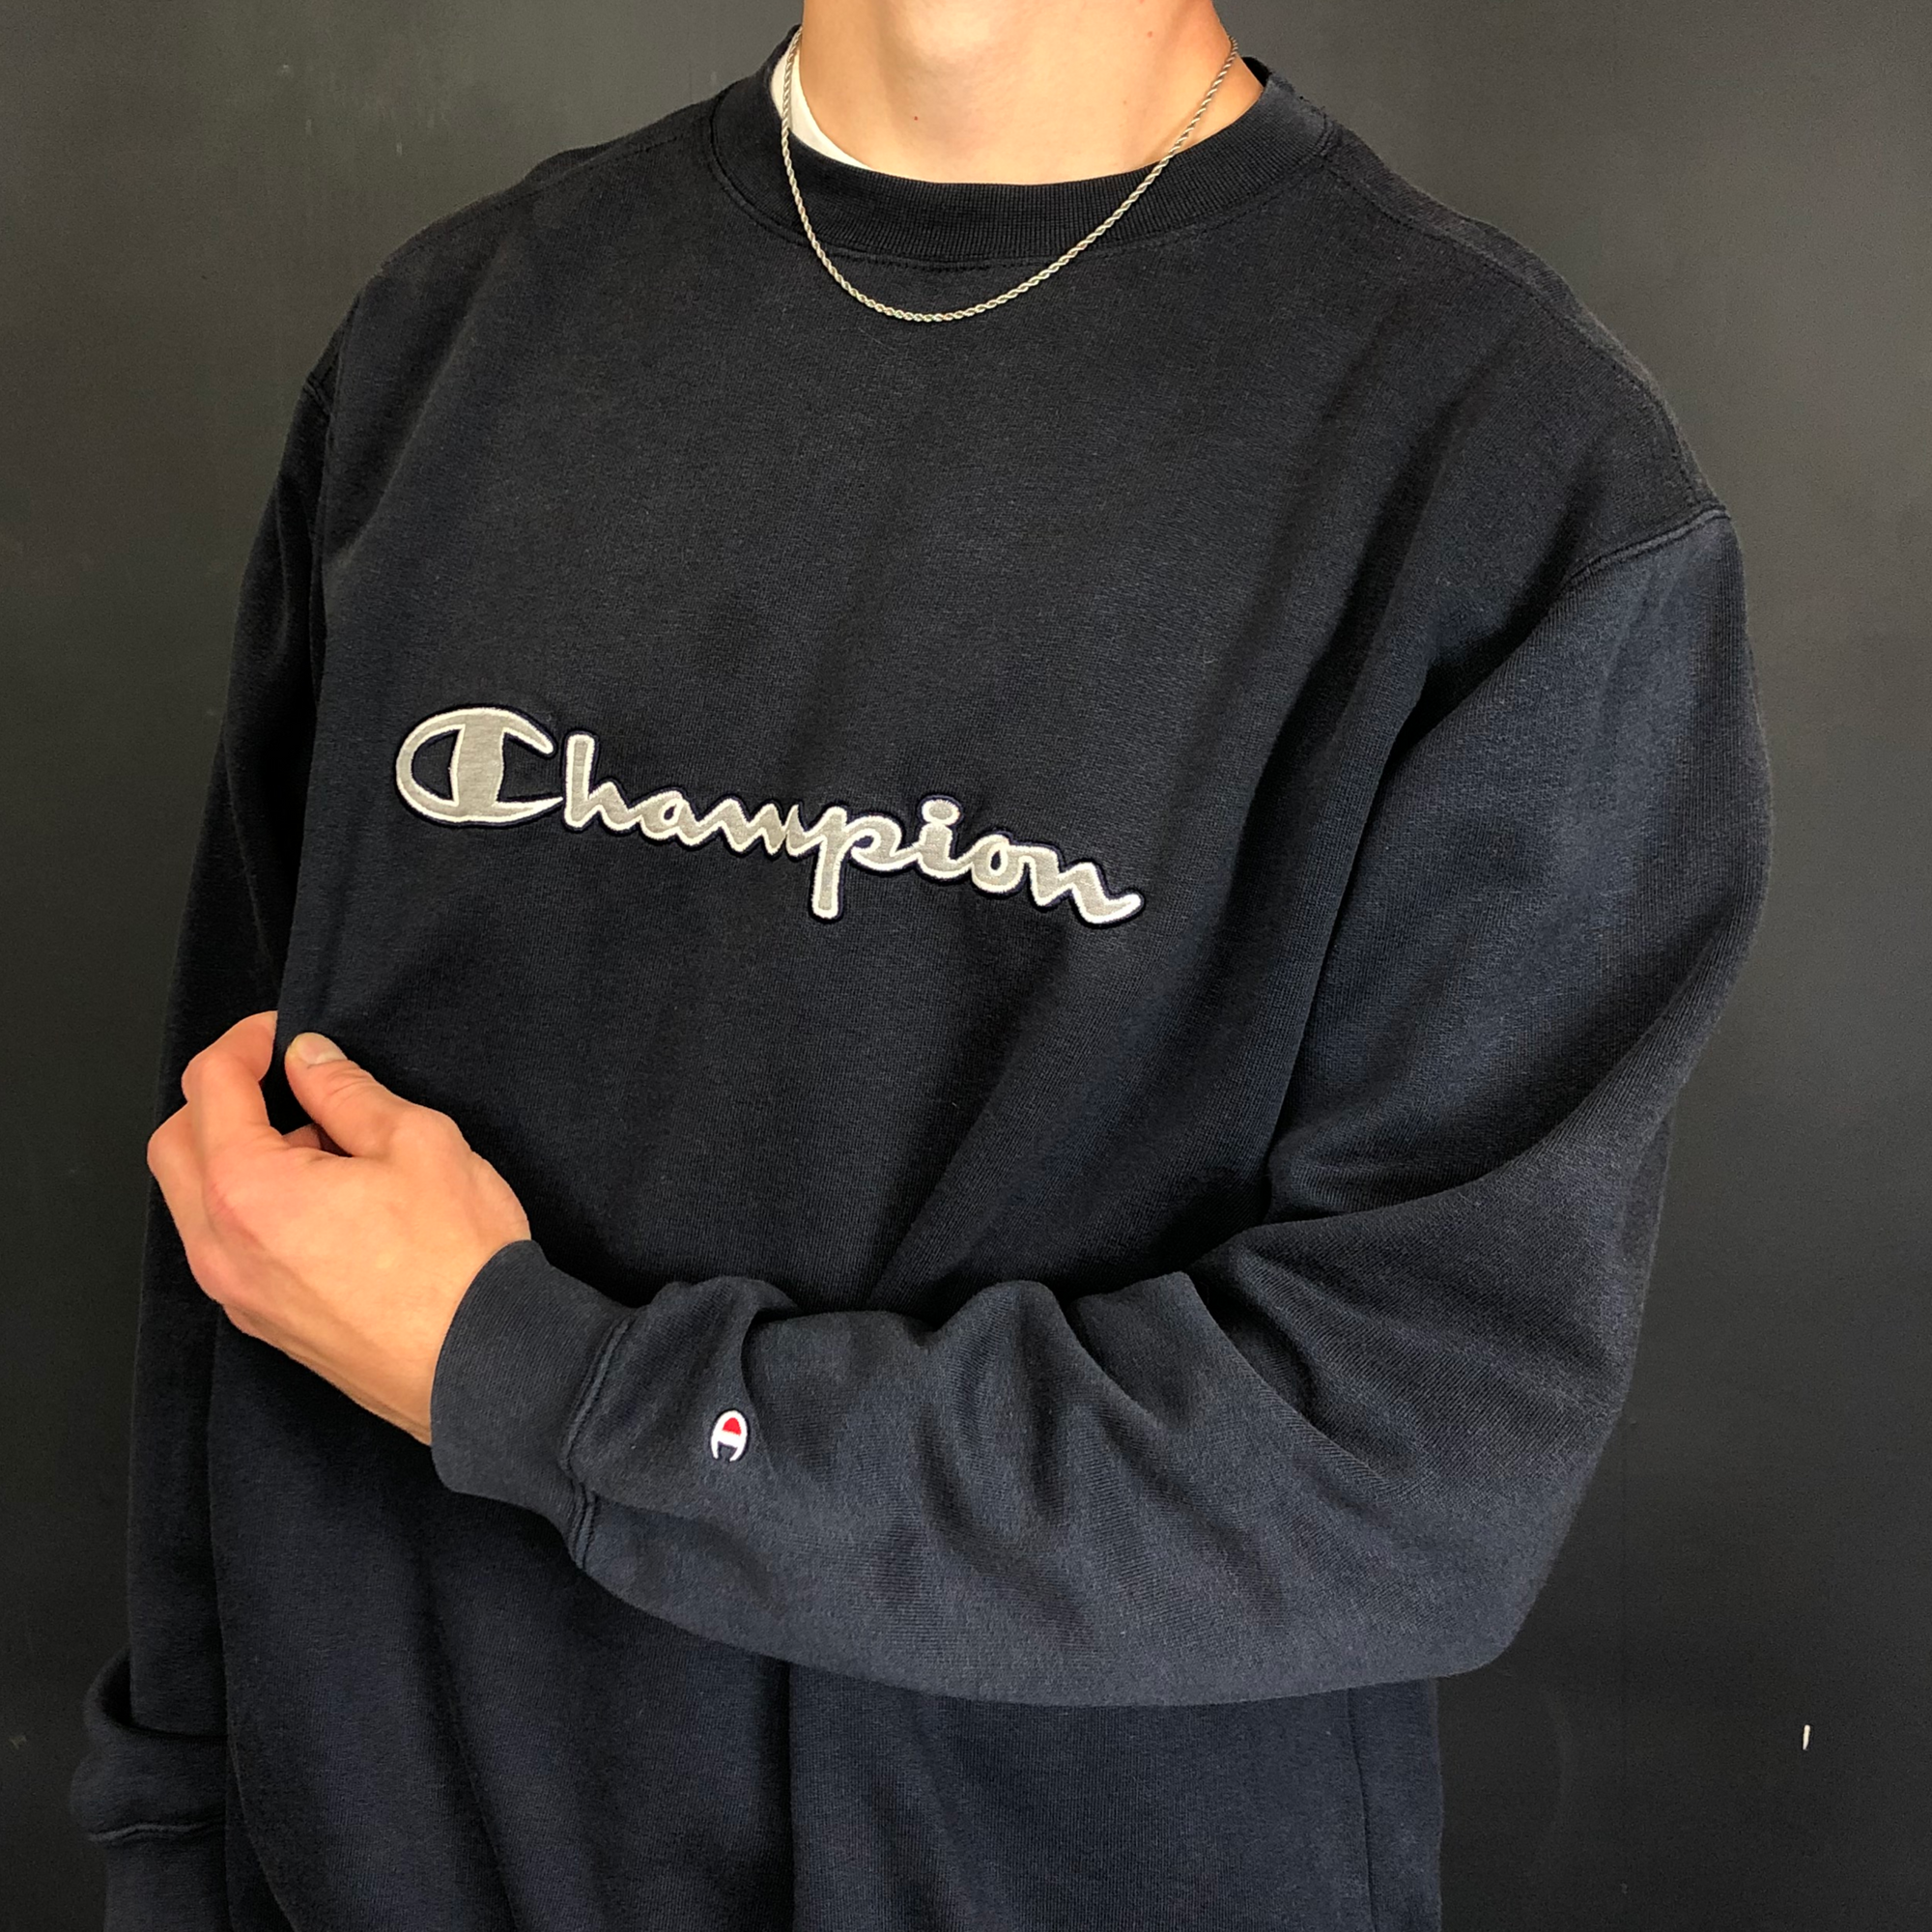 VINTAGE CHAMPION SWEATSHIRT WITH BIG EMBROIDERED SPELLOUT - Vintique Clothing